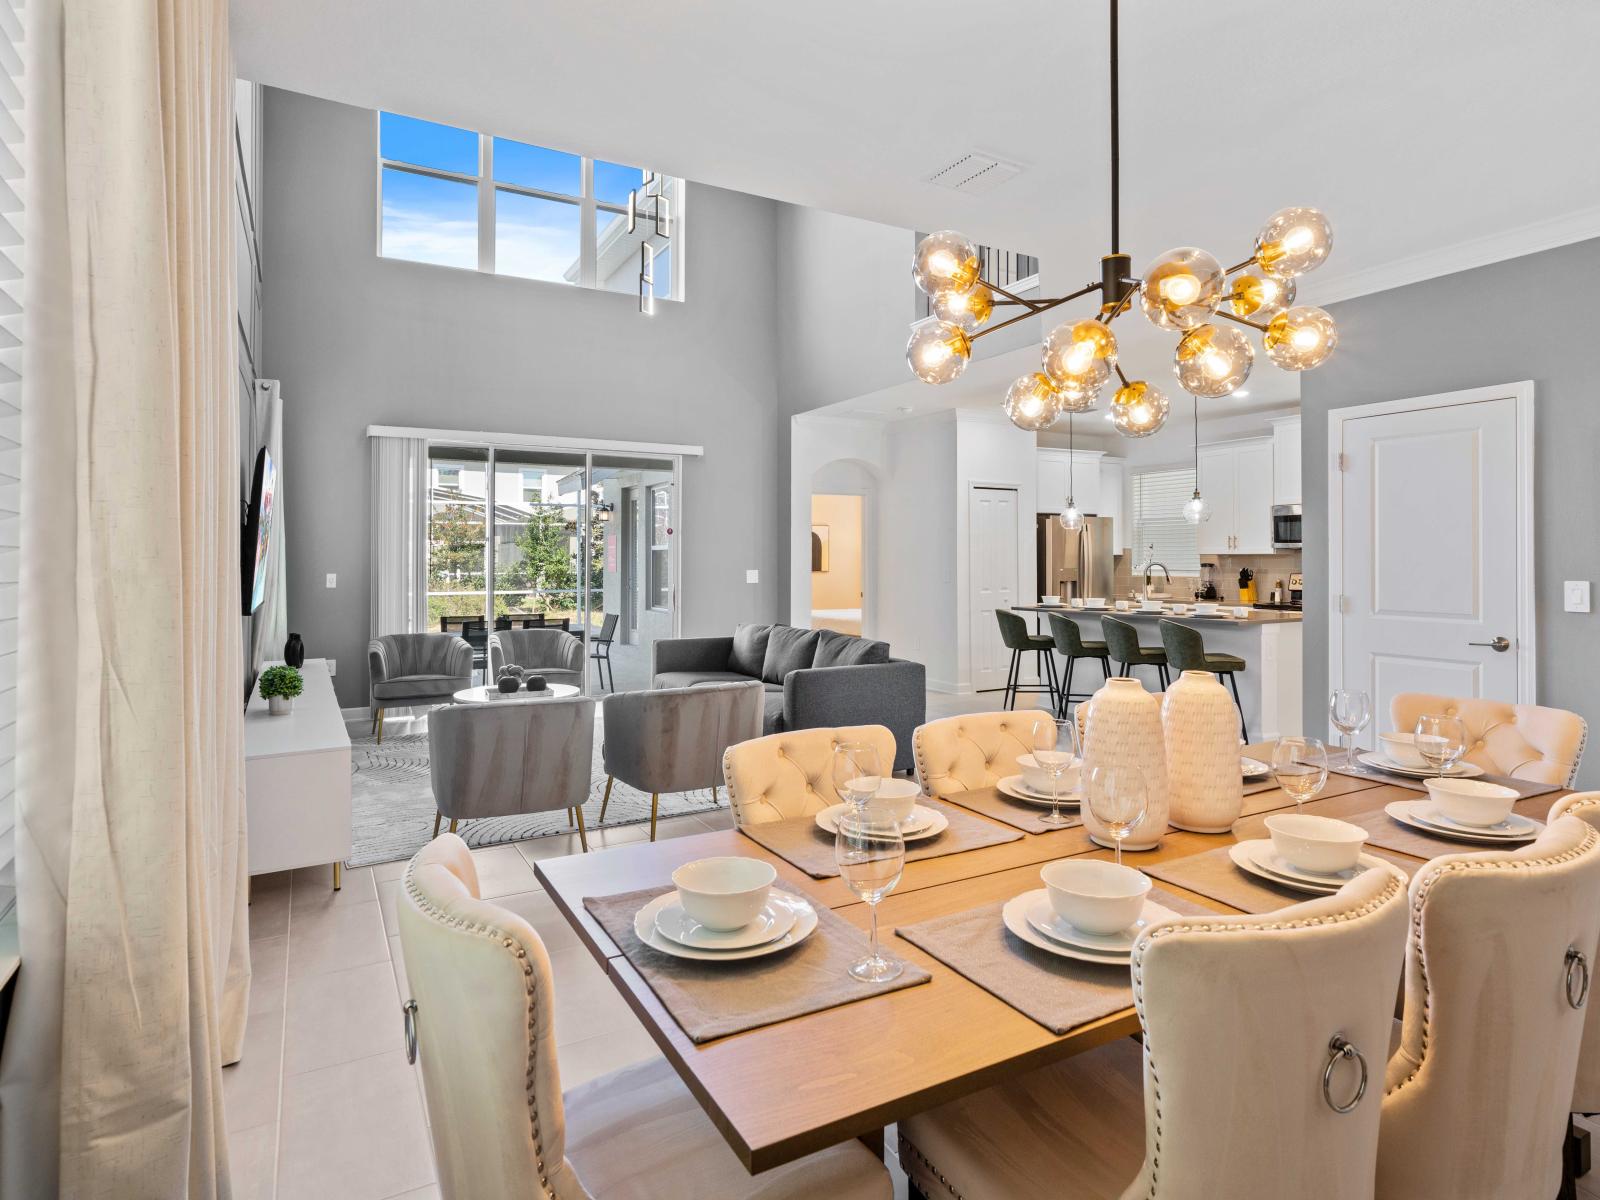 Luxury Home in Davenport Florida - Harmonious blend of living and dining spaces, providing  - Inviting atmosphere for both relaxation and shared meals - Cohesive design aesthetic carried through from furniture to window treatments